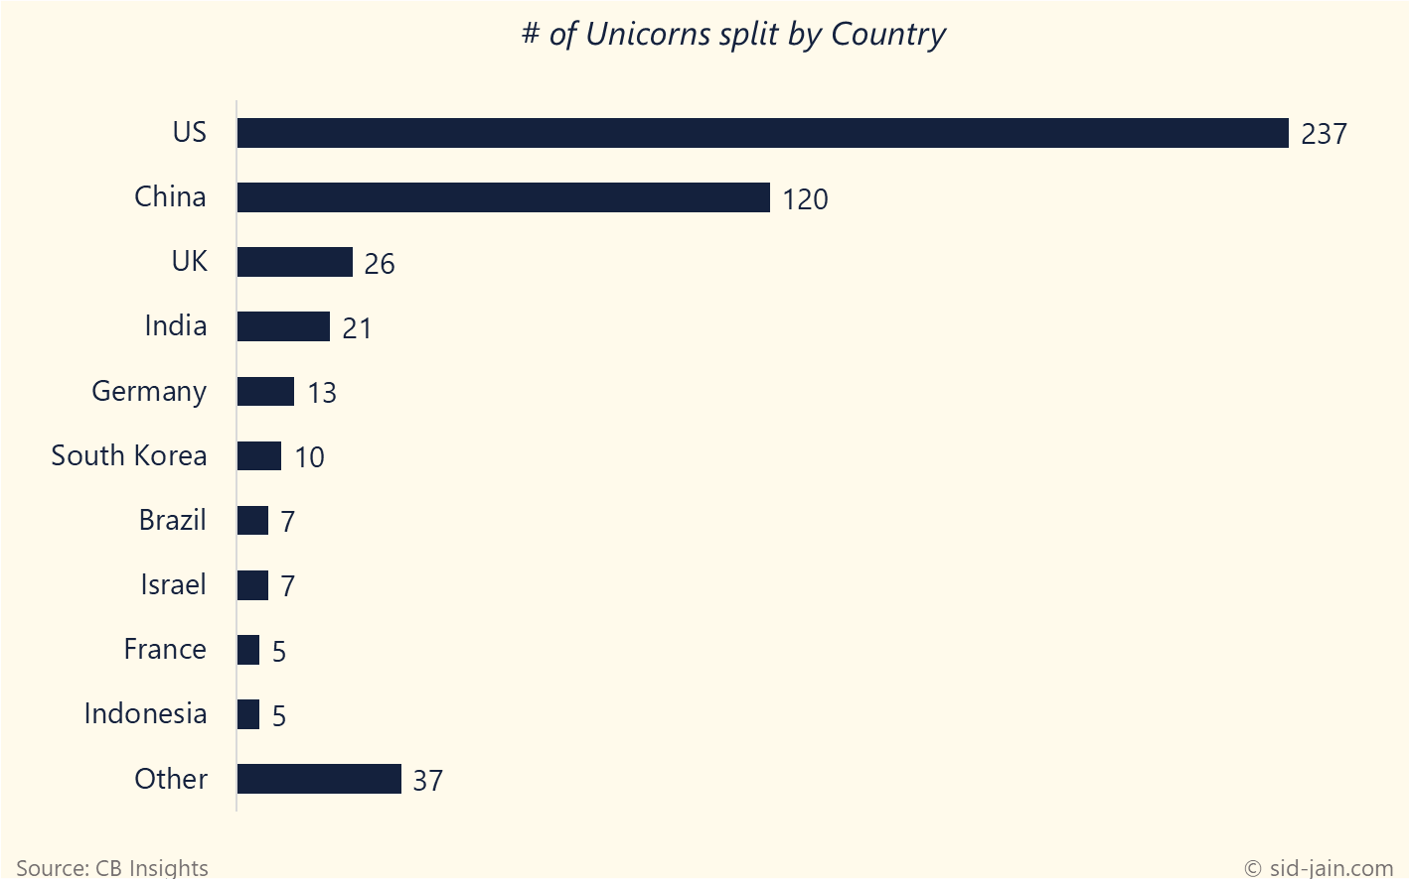 Number of Unicorns Split by Country